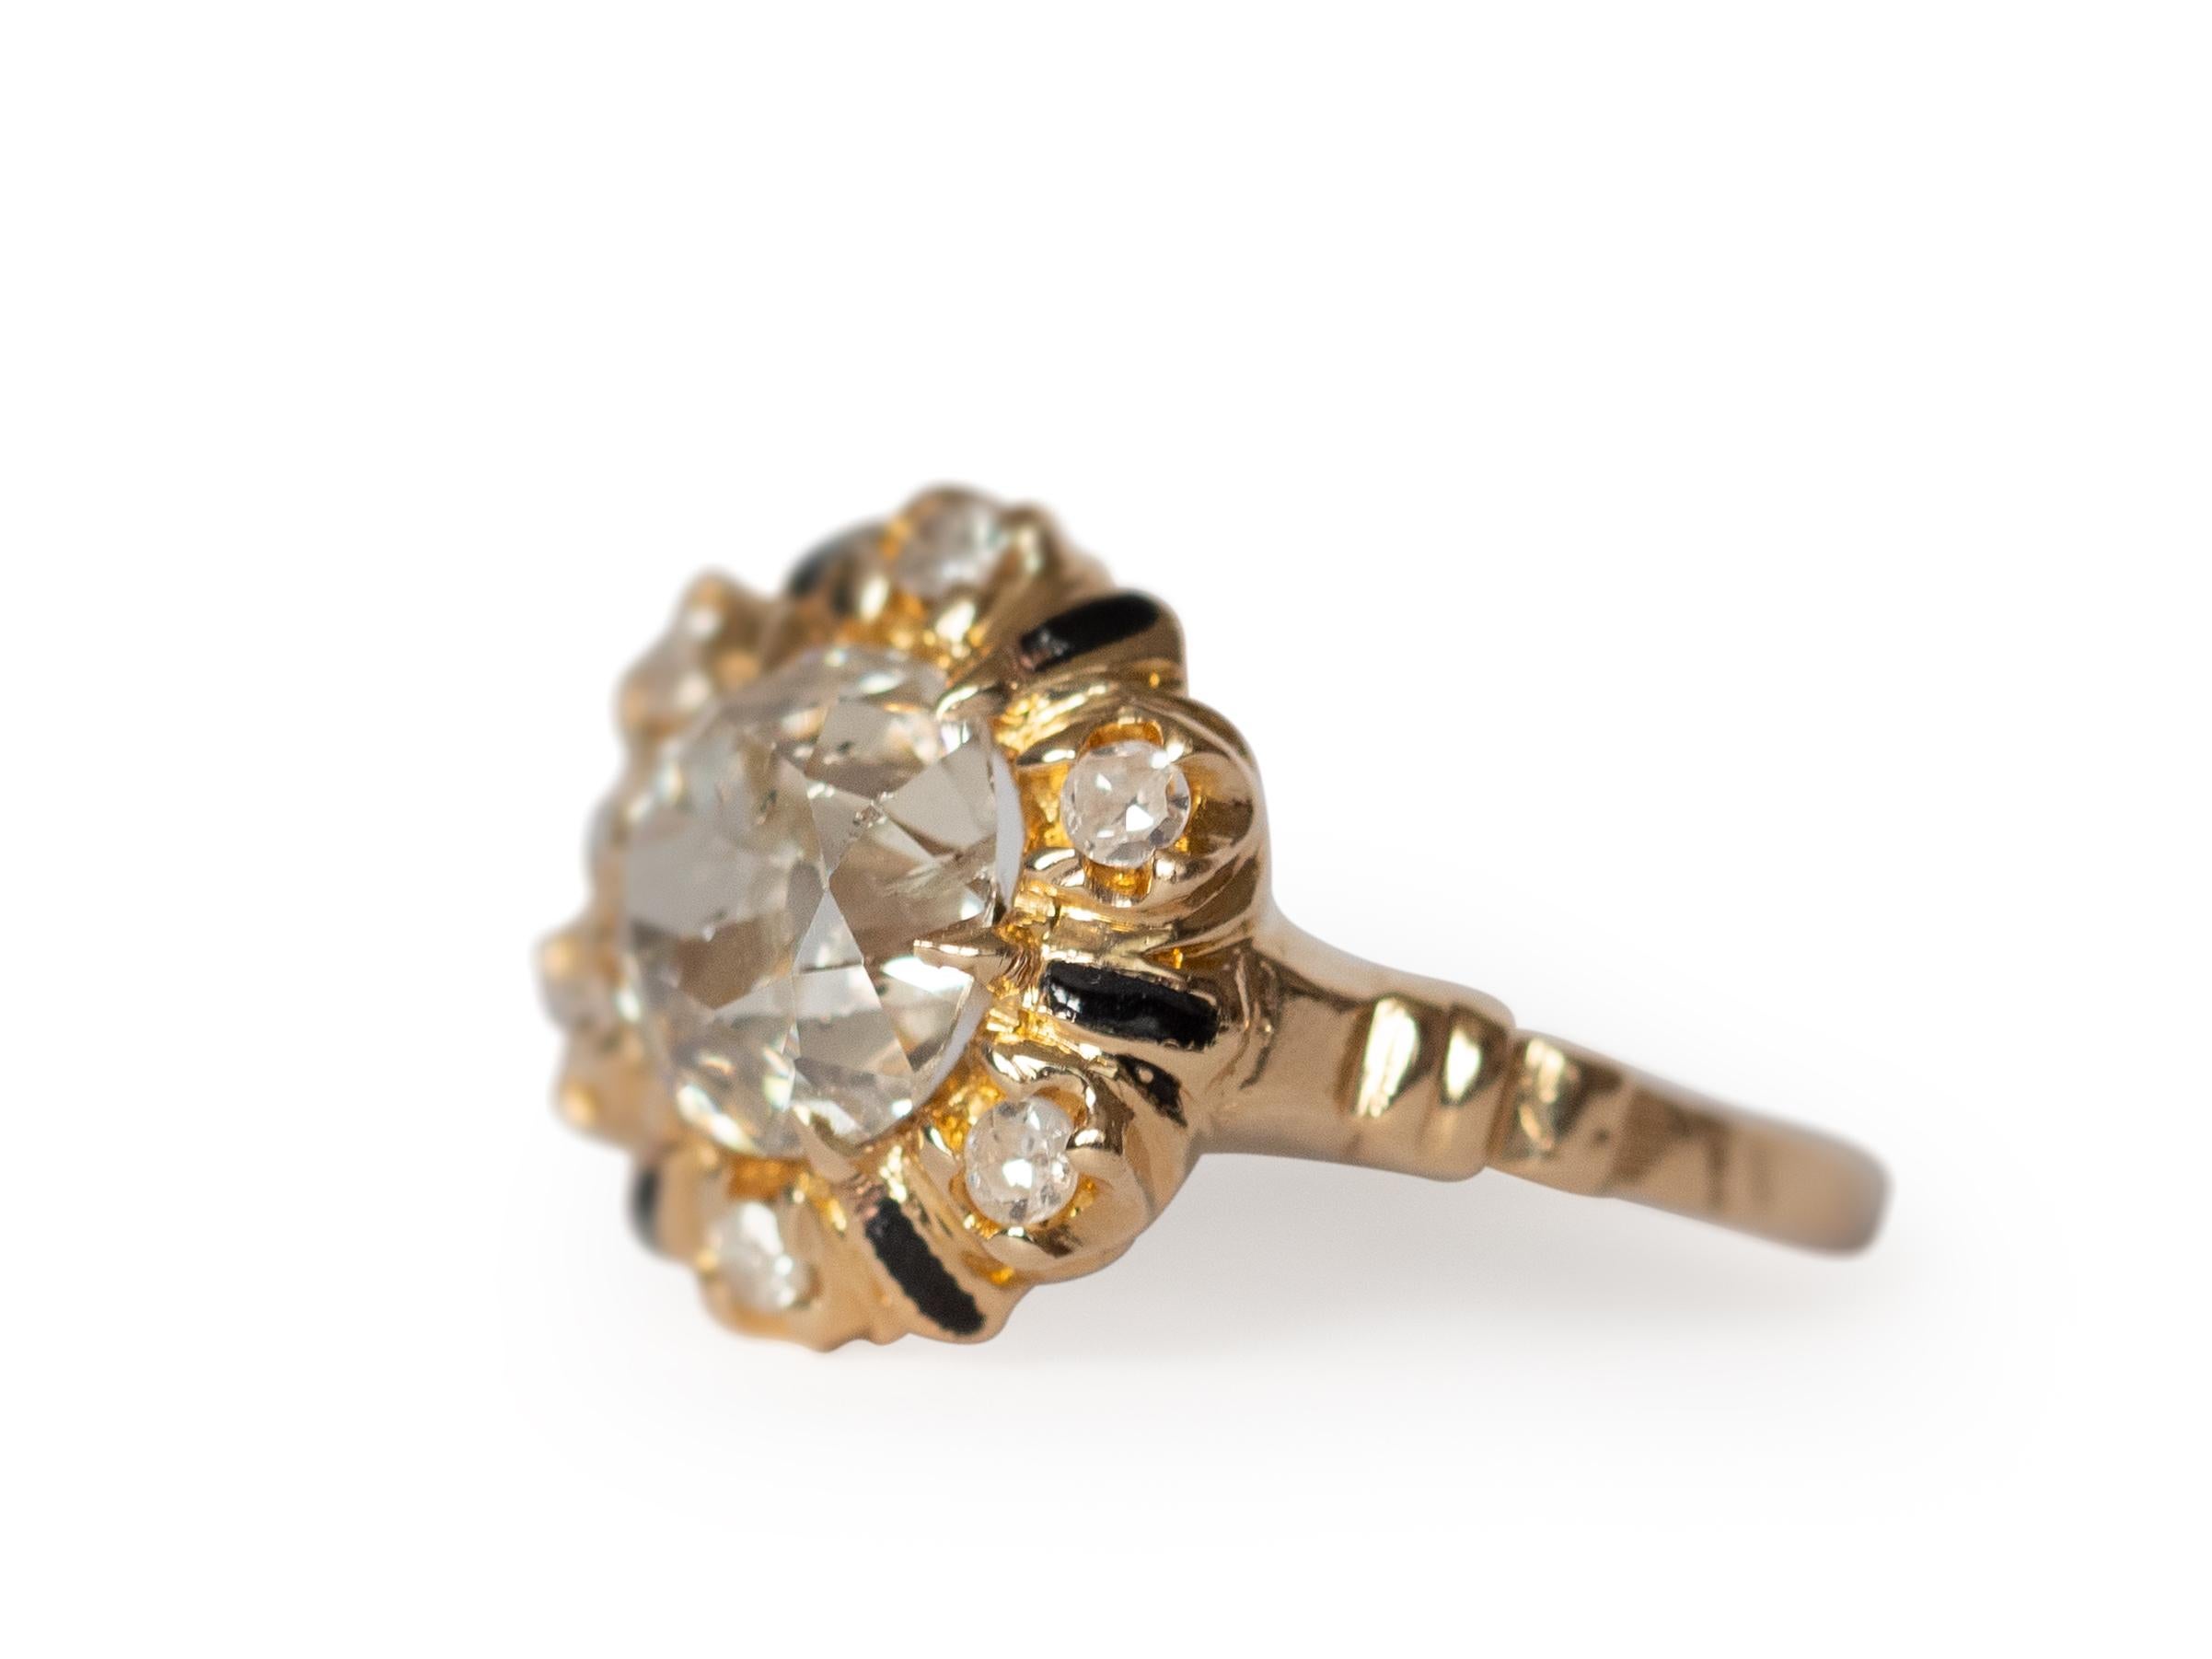 Ring Size: 6.5
Metal Type: 14K Yellow Gold  [Hallmarked, and Tested]
Weight:  3.5 grams

Center Diamond Details:
Weight: 2.10 carat
Cut: Old Mine Brilliant (Antique Cushion)
Color: M
Clarity: I1

Side Diamond Details:
Weight: .20 carat, total